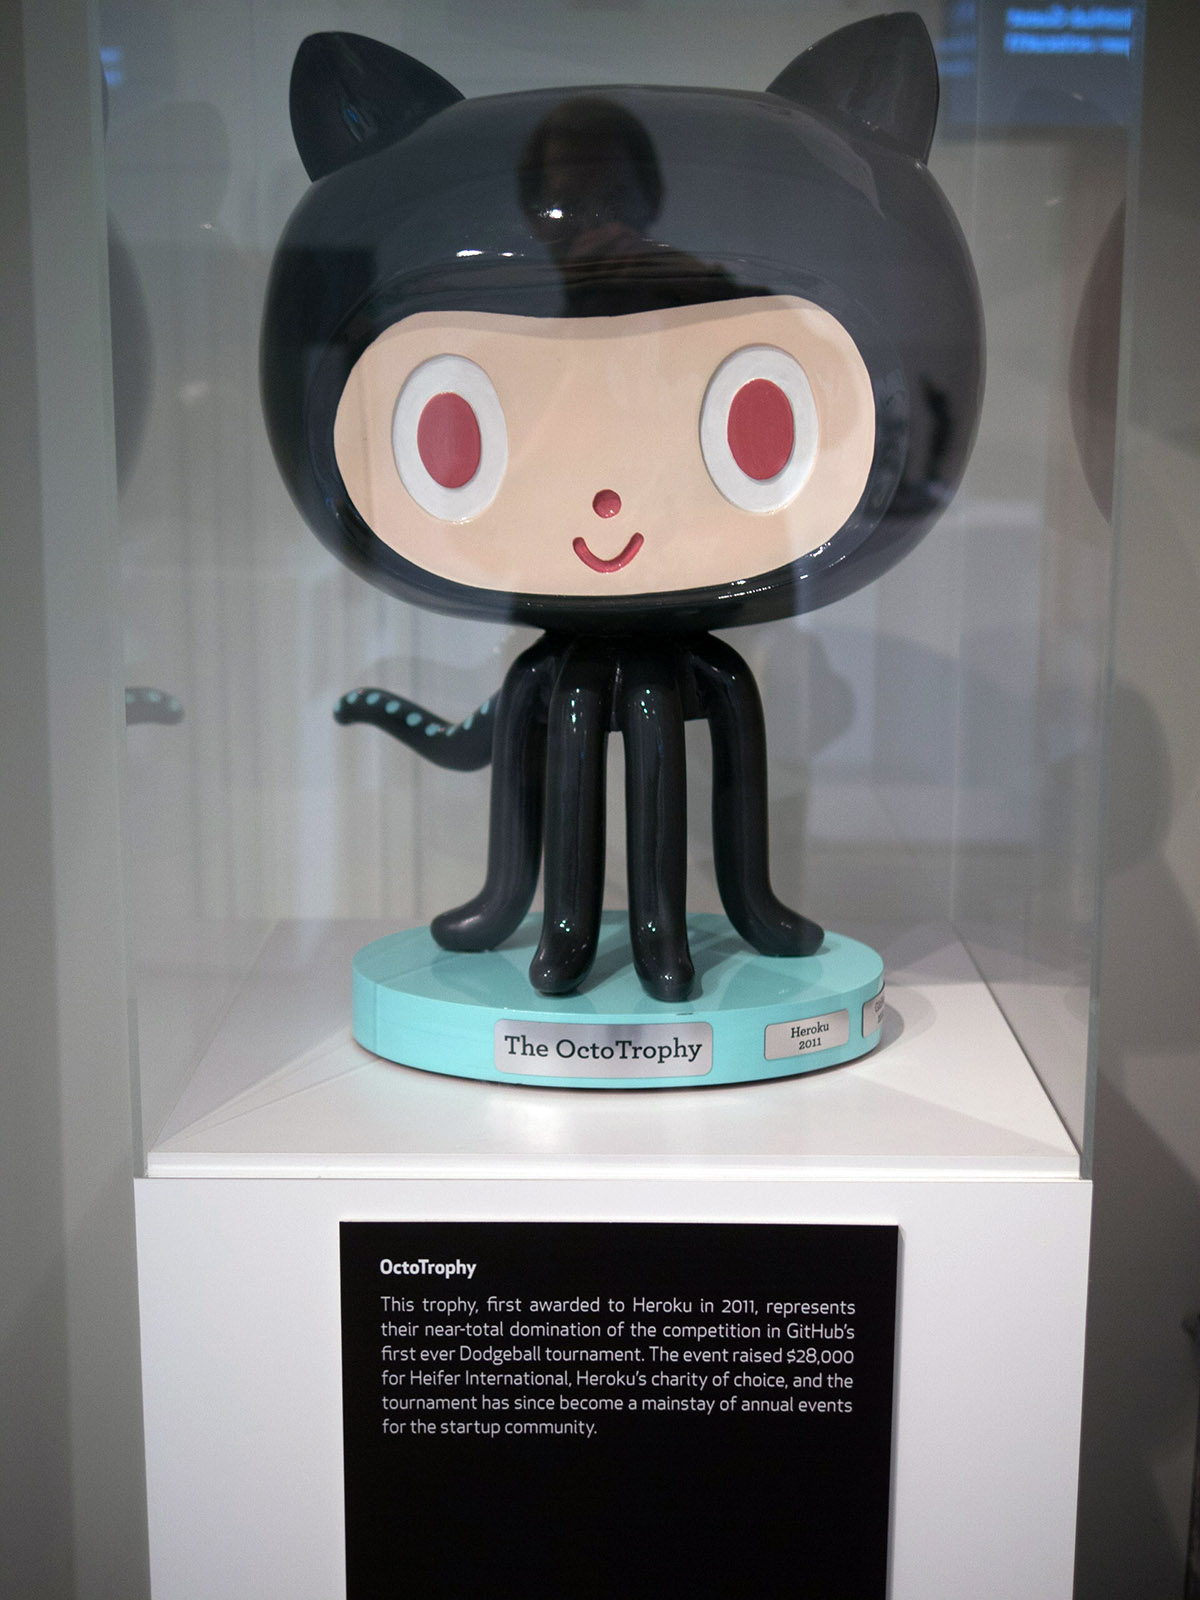 The Github Octotrophy